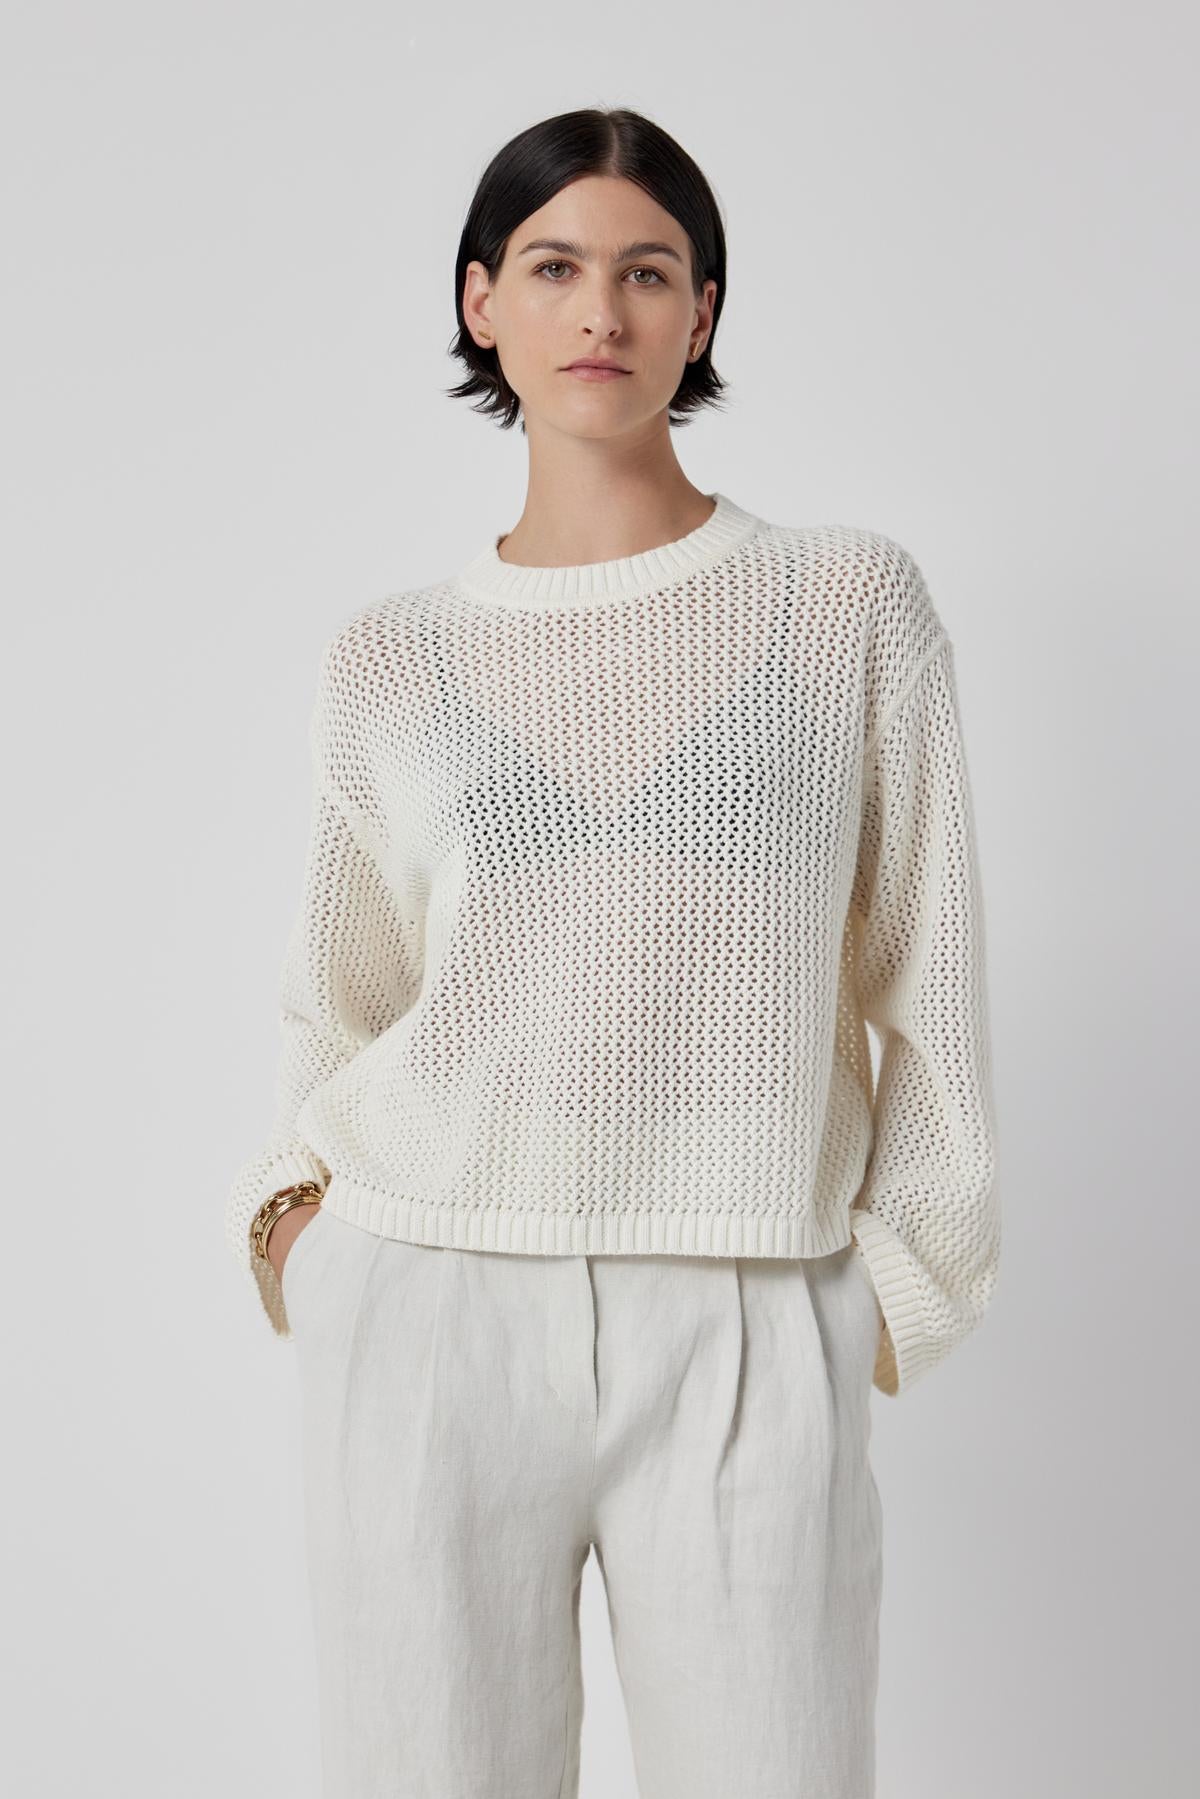   The model is wearing a lightweight KANAN SWEATER by Velvet by Jenny Graham and white trousers. 